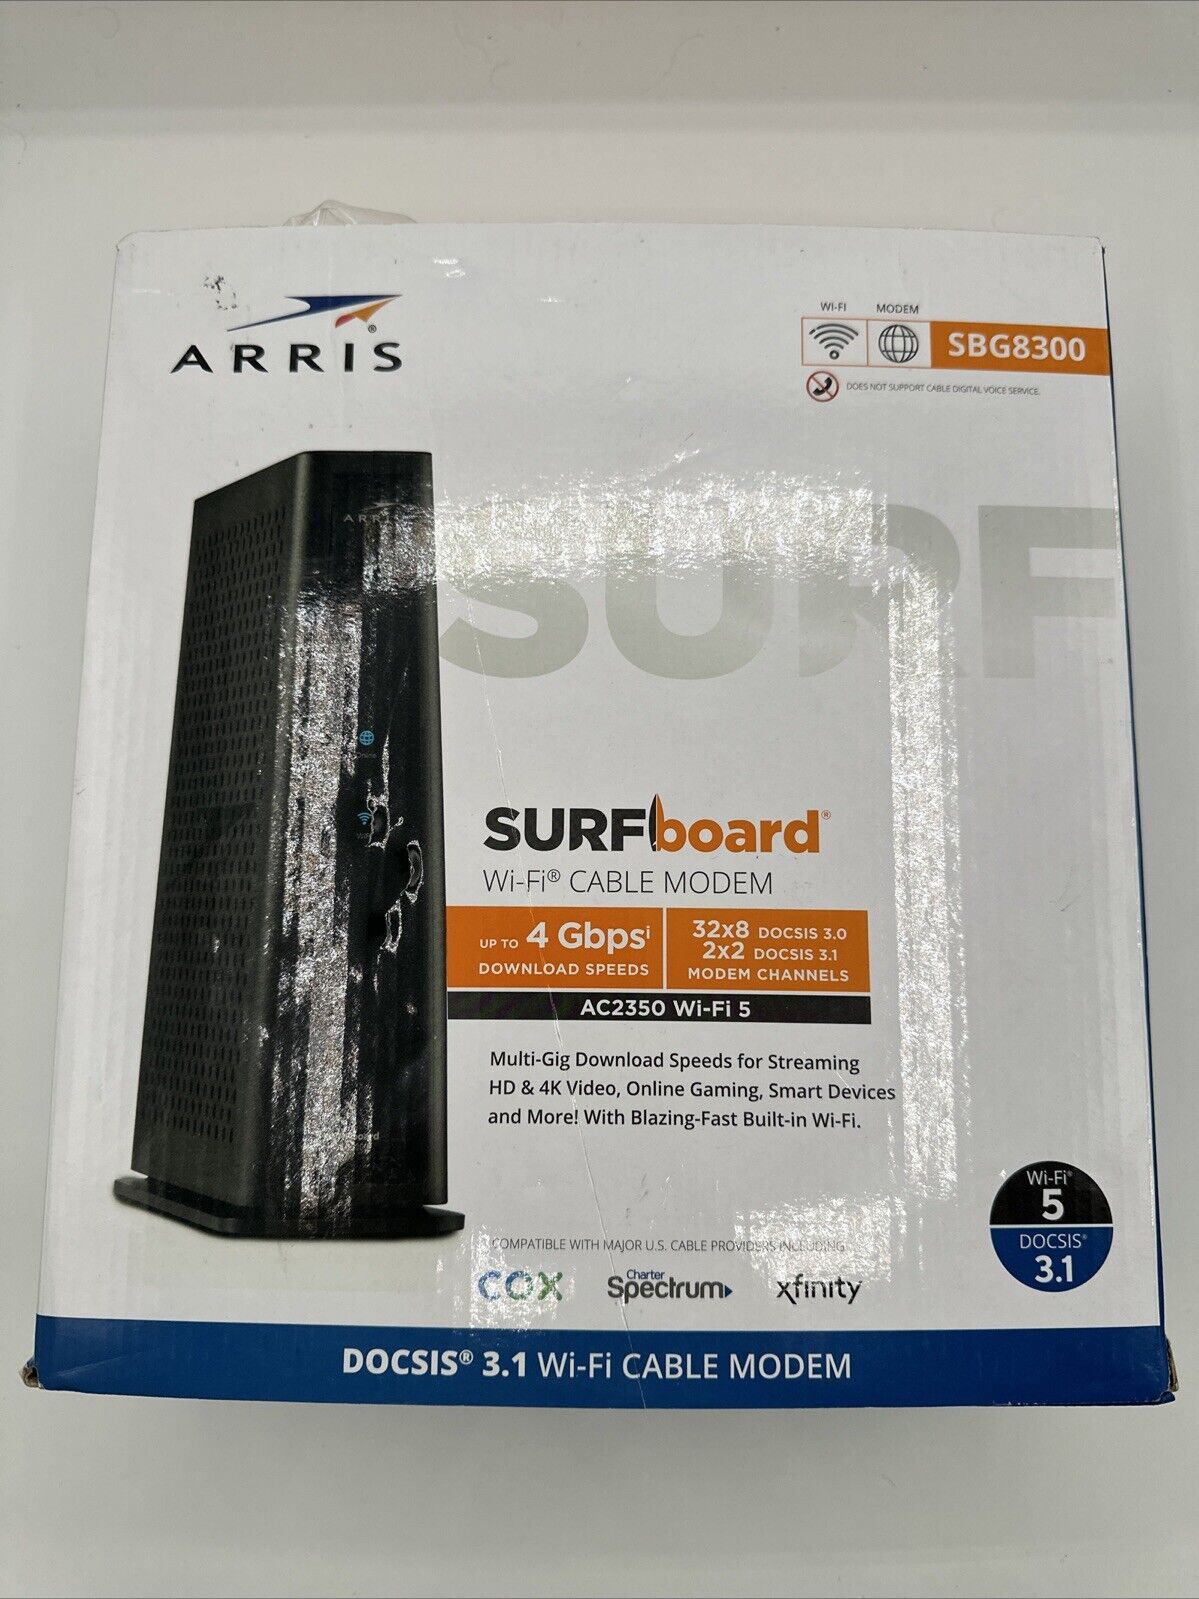 Arris SURFboard SBG8300 DOCSIS 3.1 Cable Modem & Wi-Fi Router